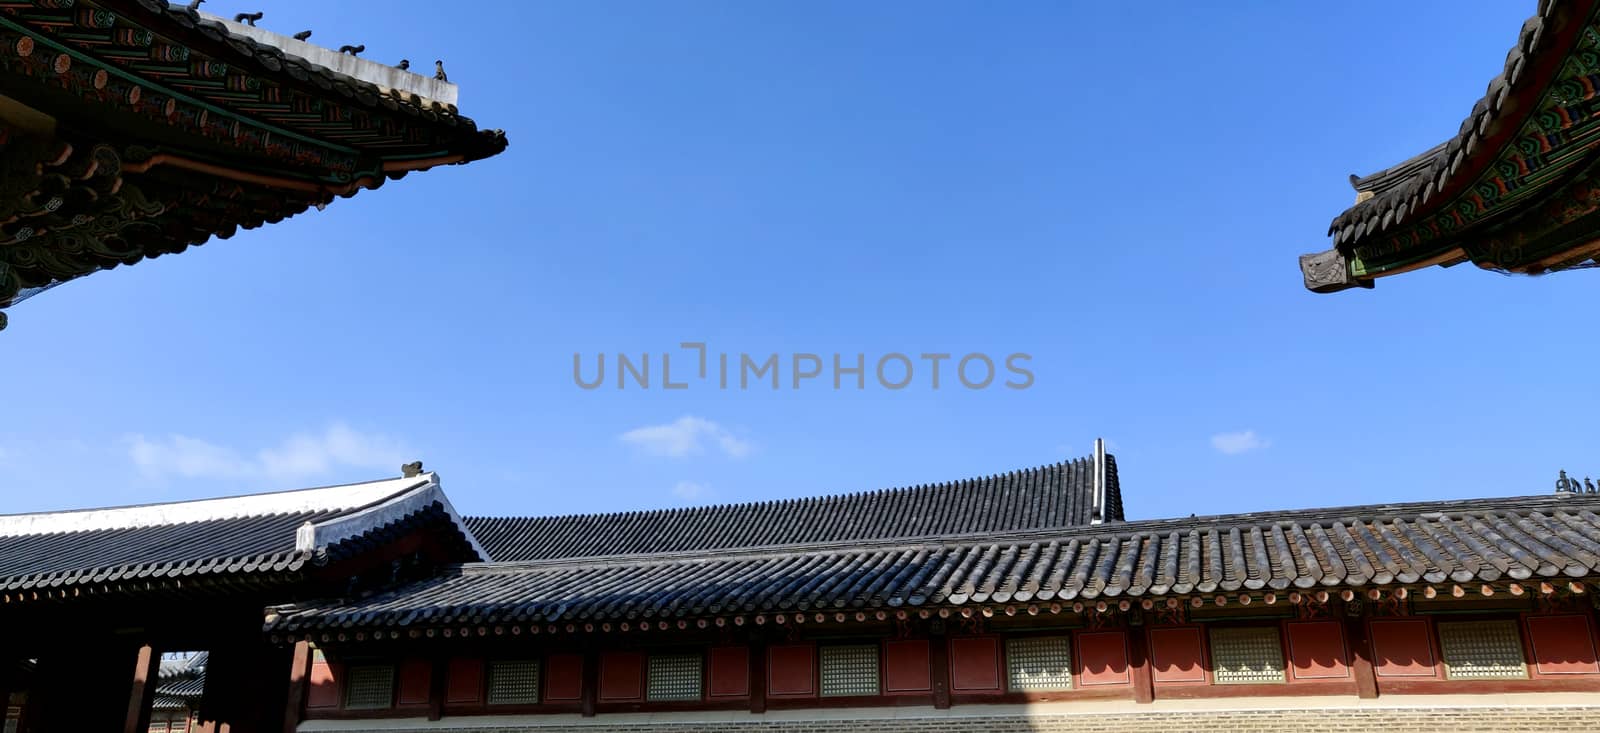 Ancient structure and roof of the traditional houses in Seoul, South Korea